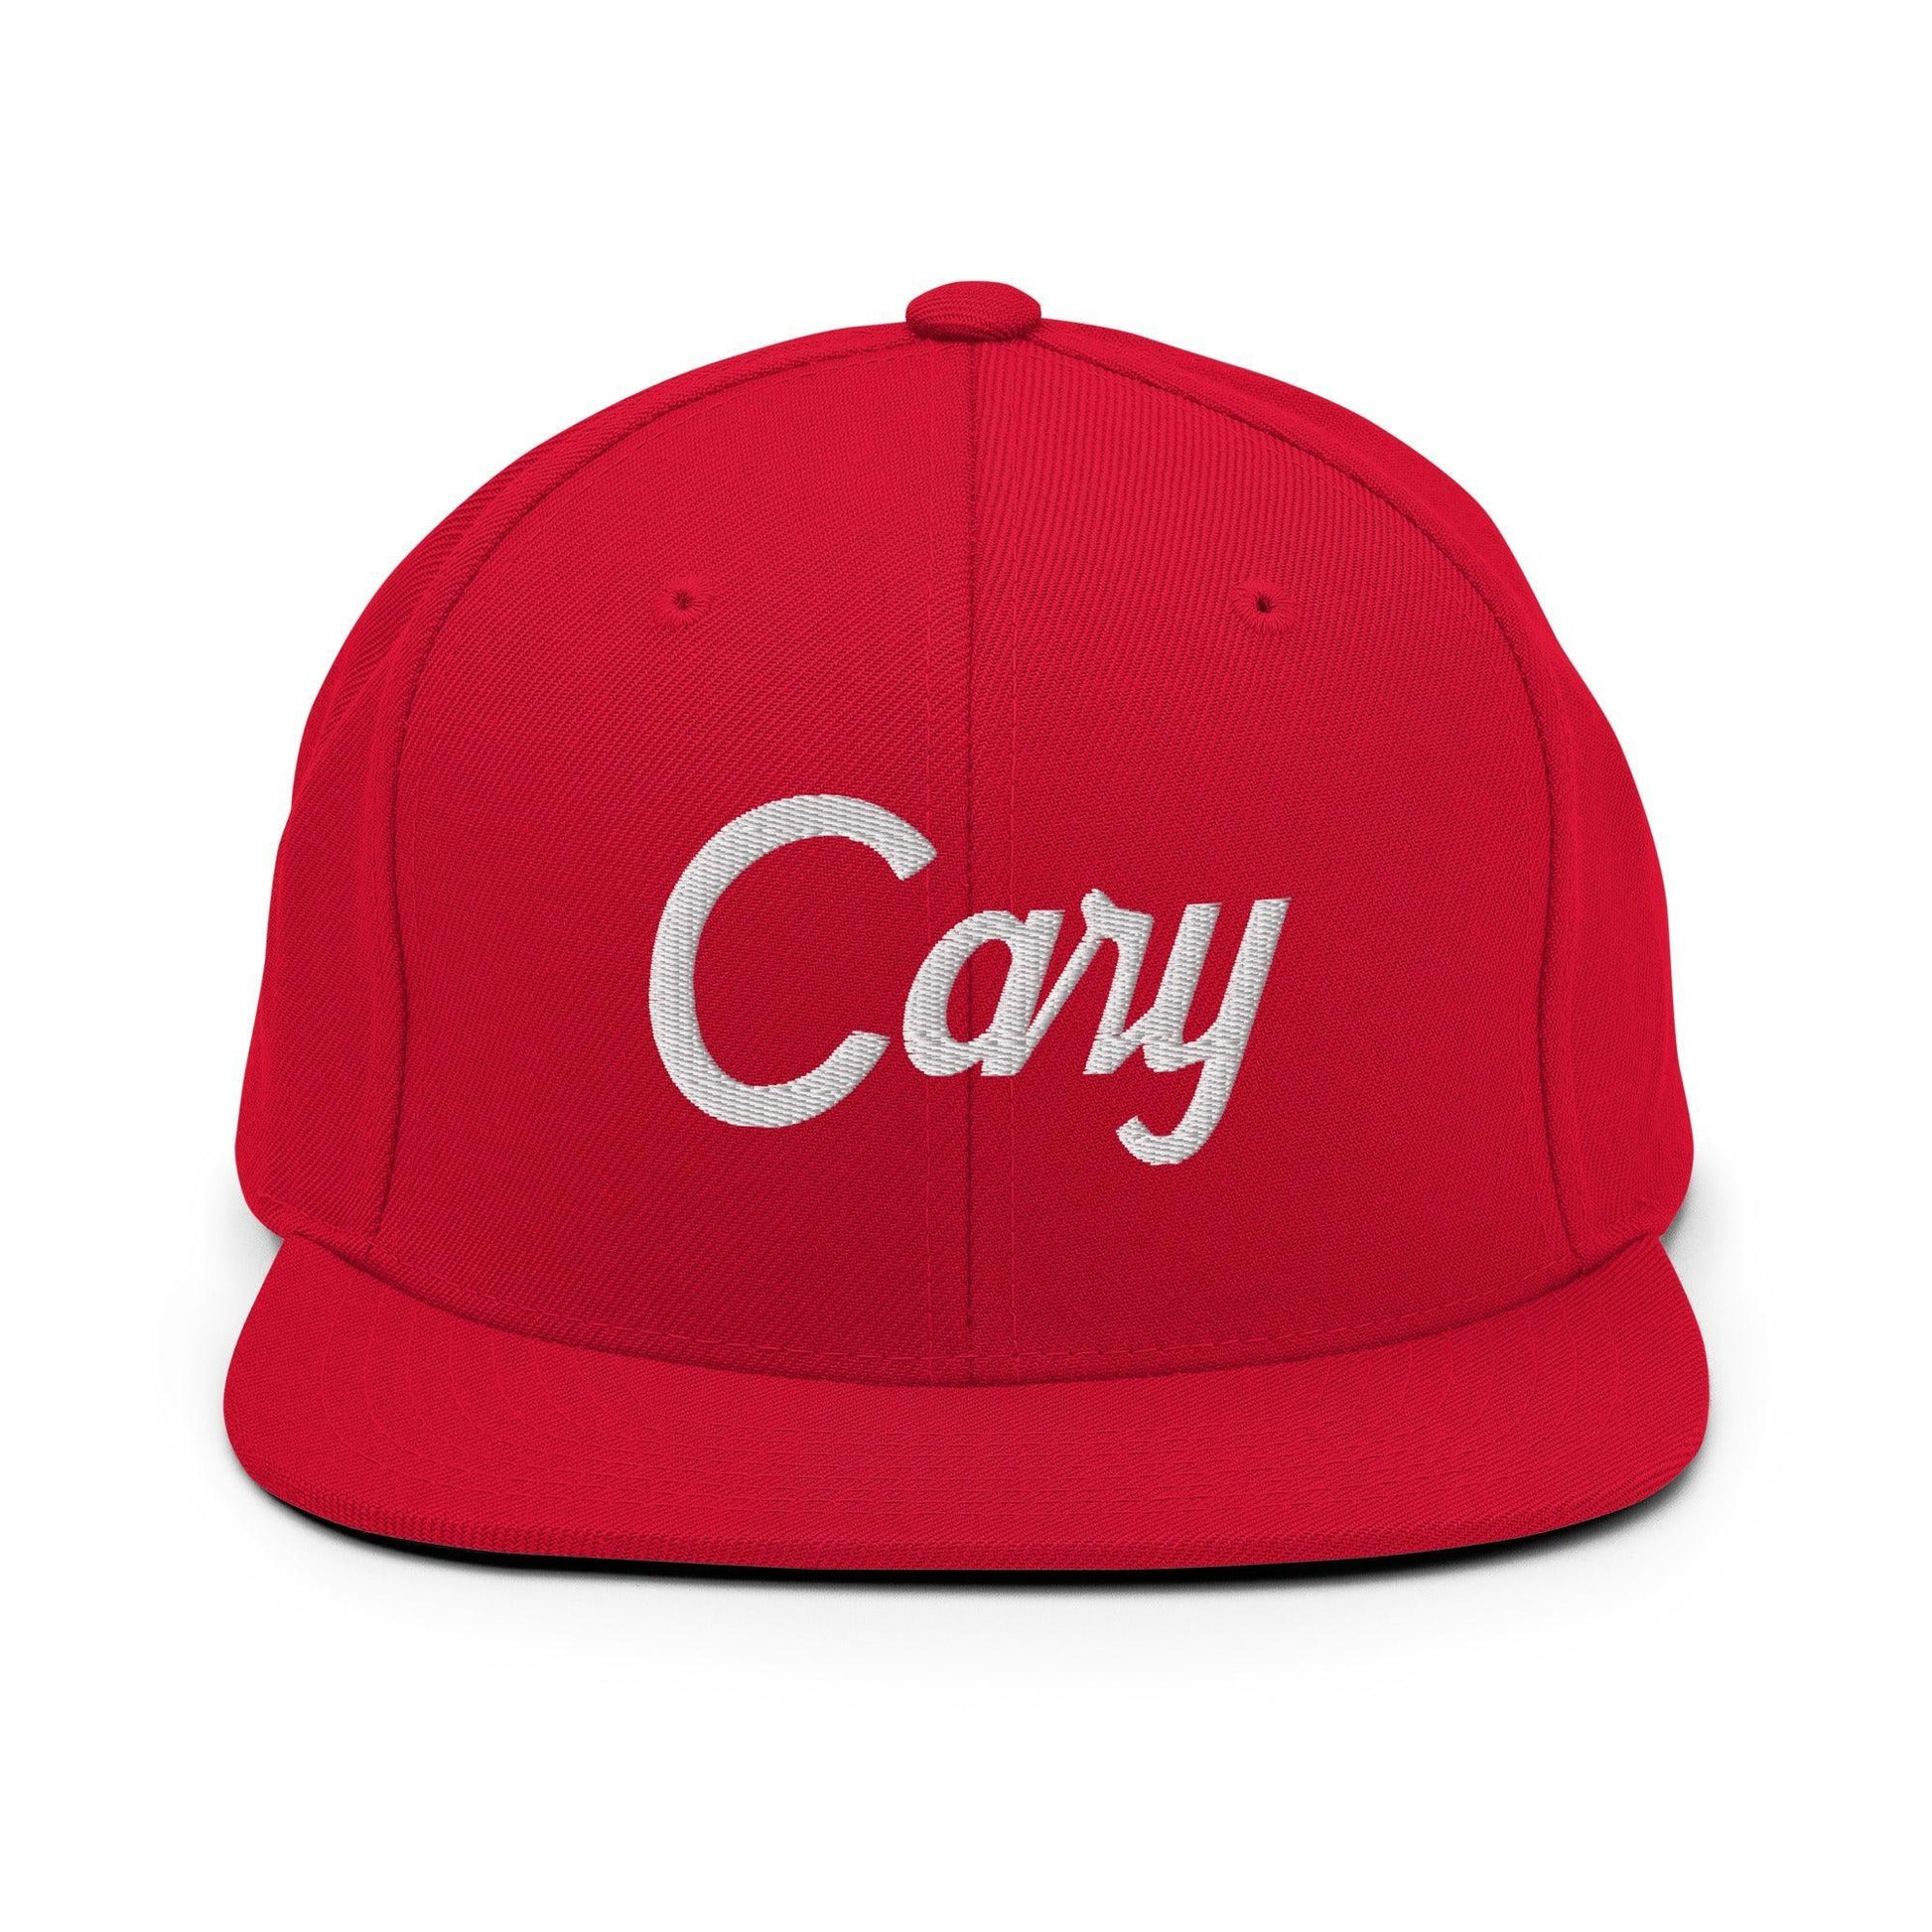 Cary Script Snapback Hat Red